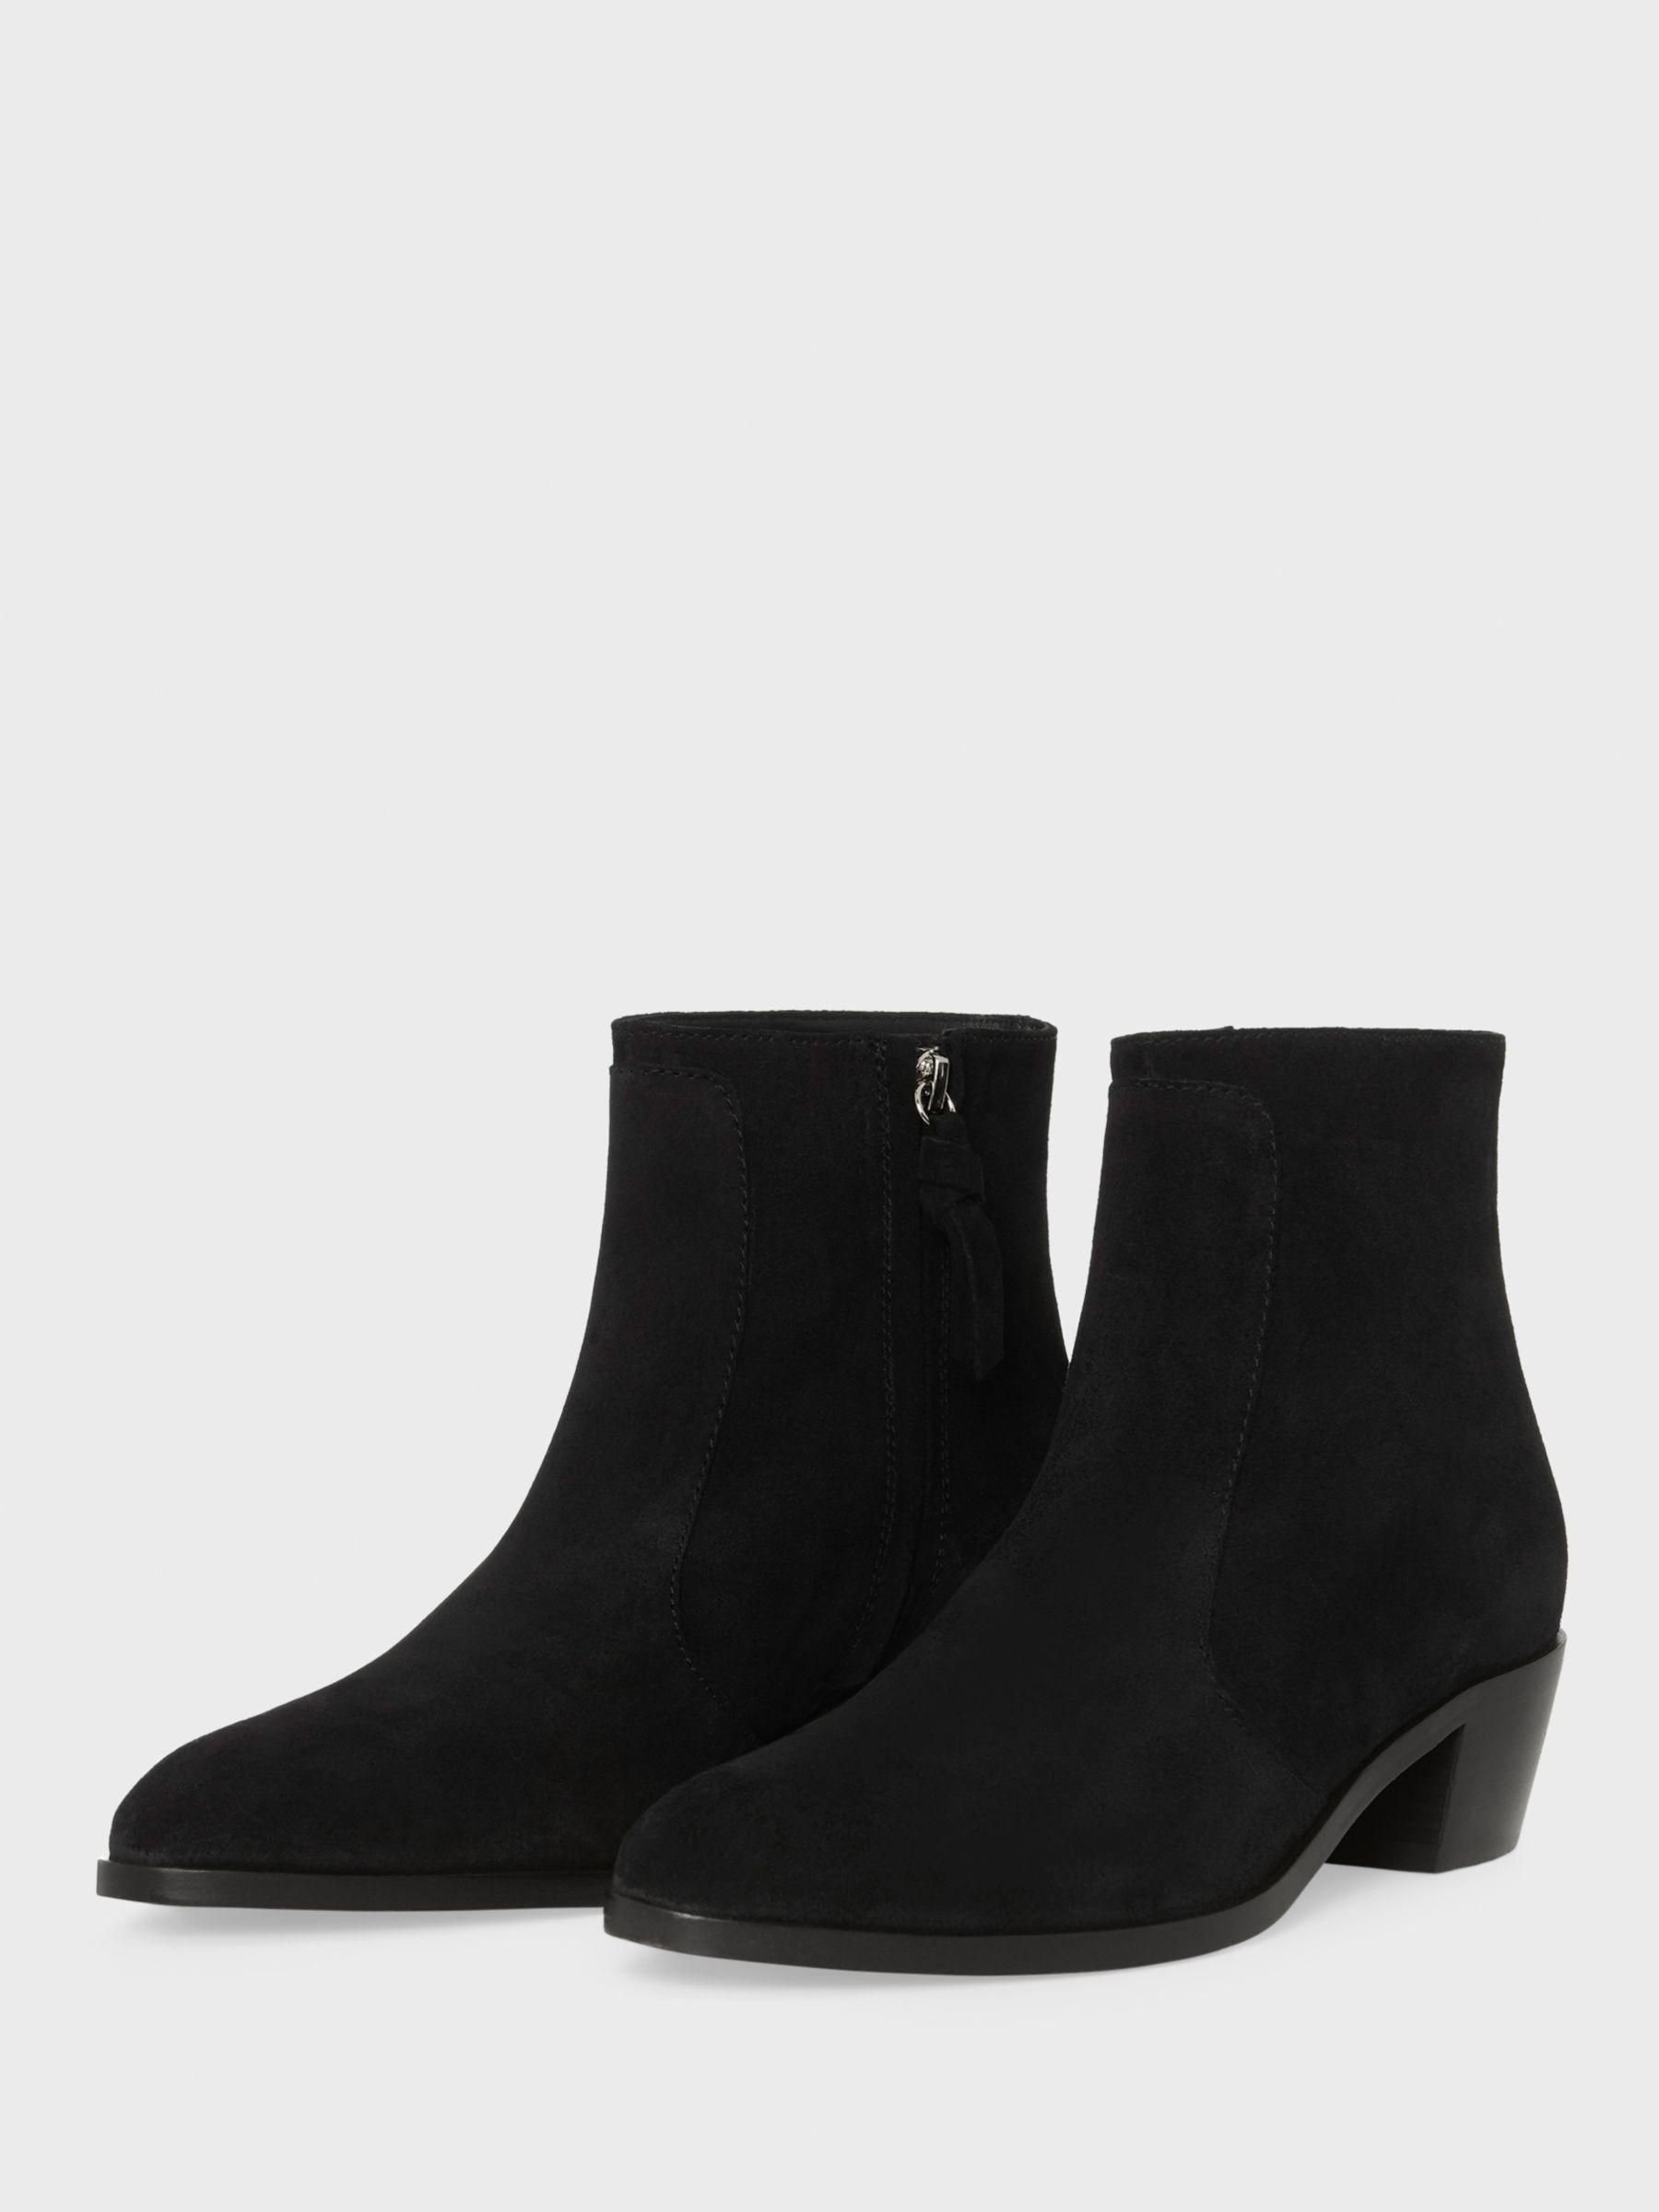 Hobbs Shona Suede Ankle Boots, Black at John Lewis & Partners